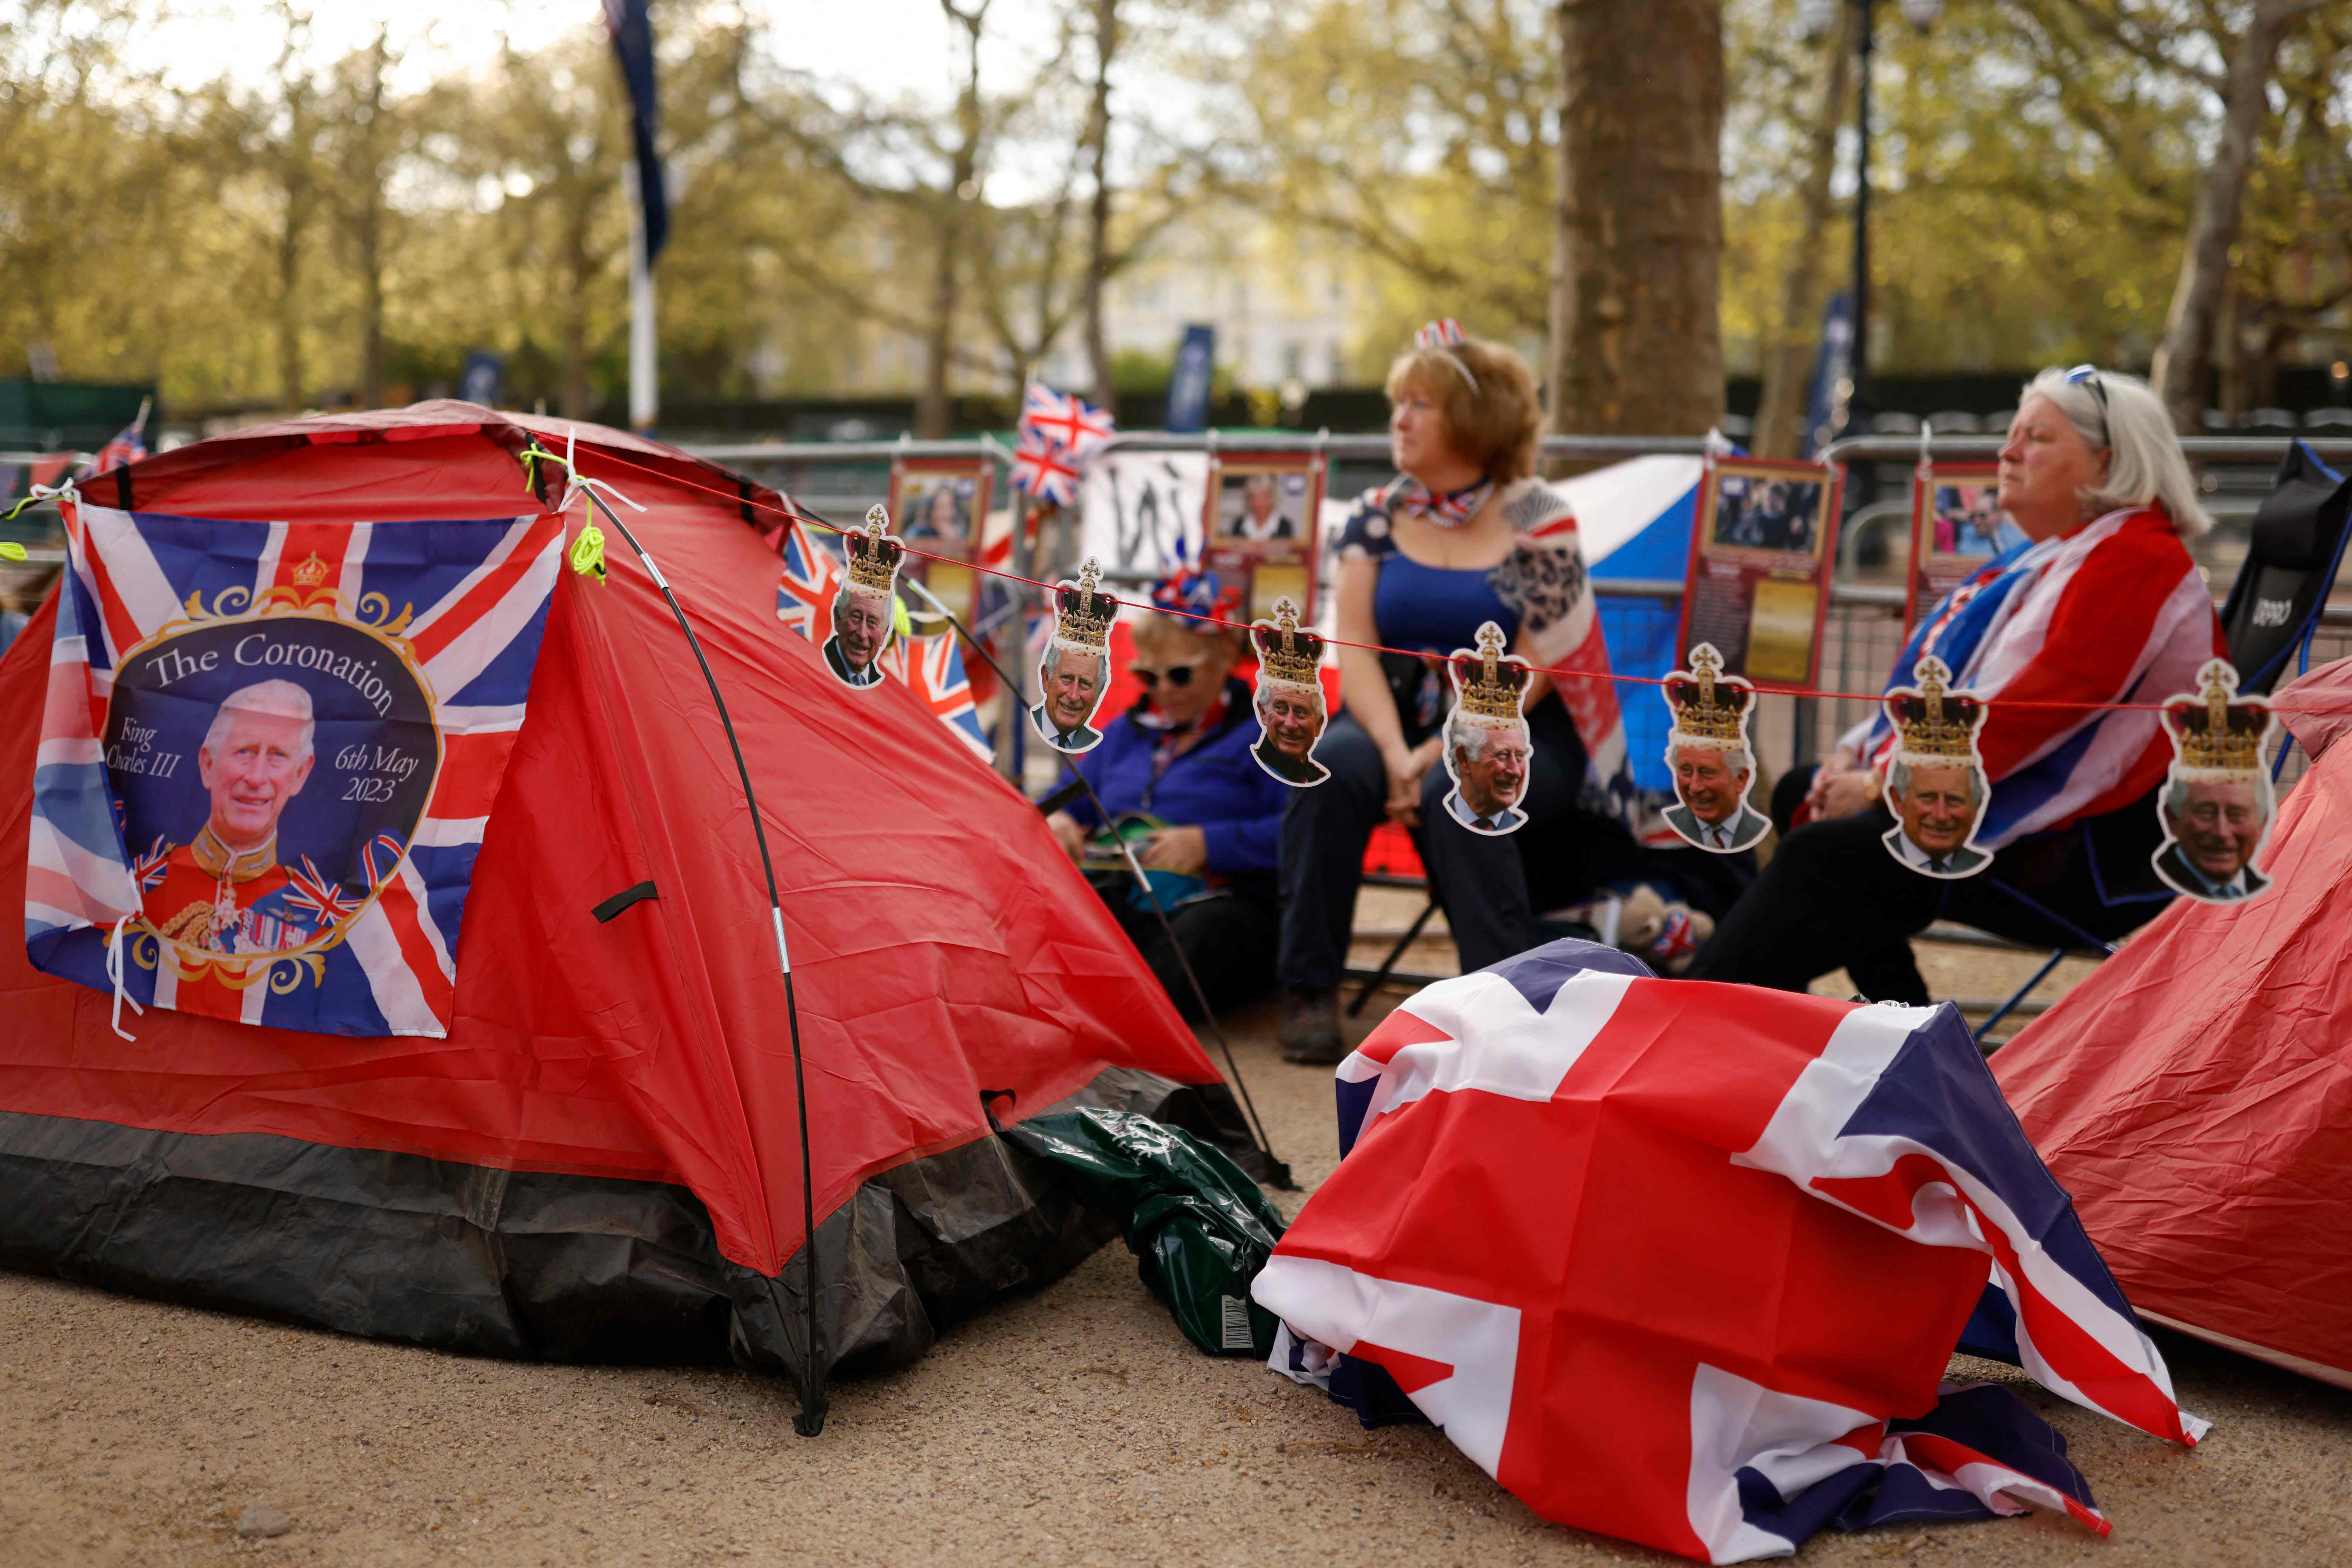 Royal fans camping outside along the mall in preparation for the coronation